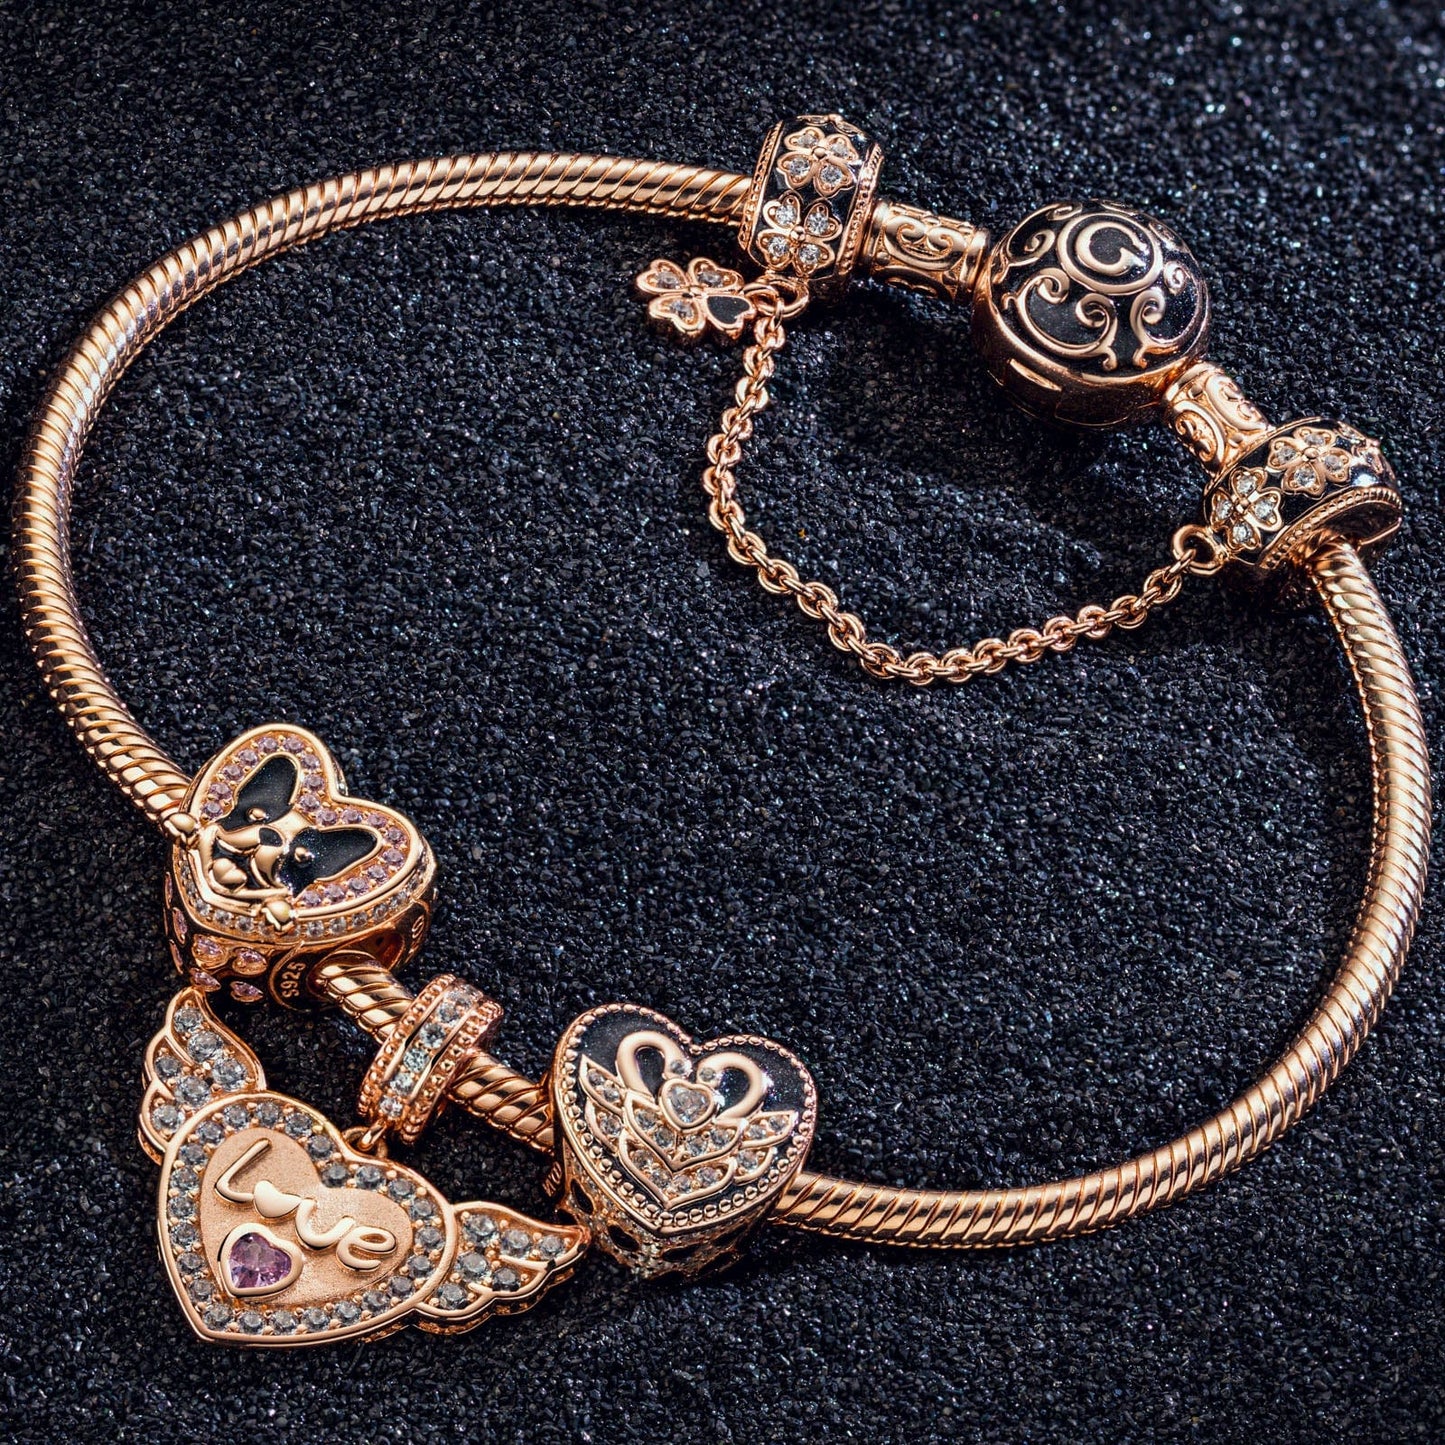 Romantic Love Guardian Tarnish-resistant Silver Charms Bracelet Set With Enamel In 14K Gold Plated